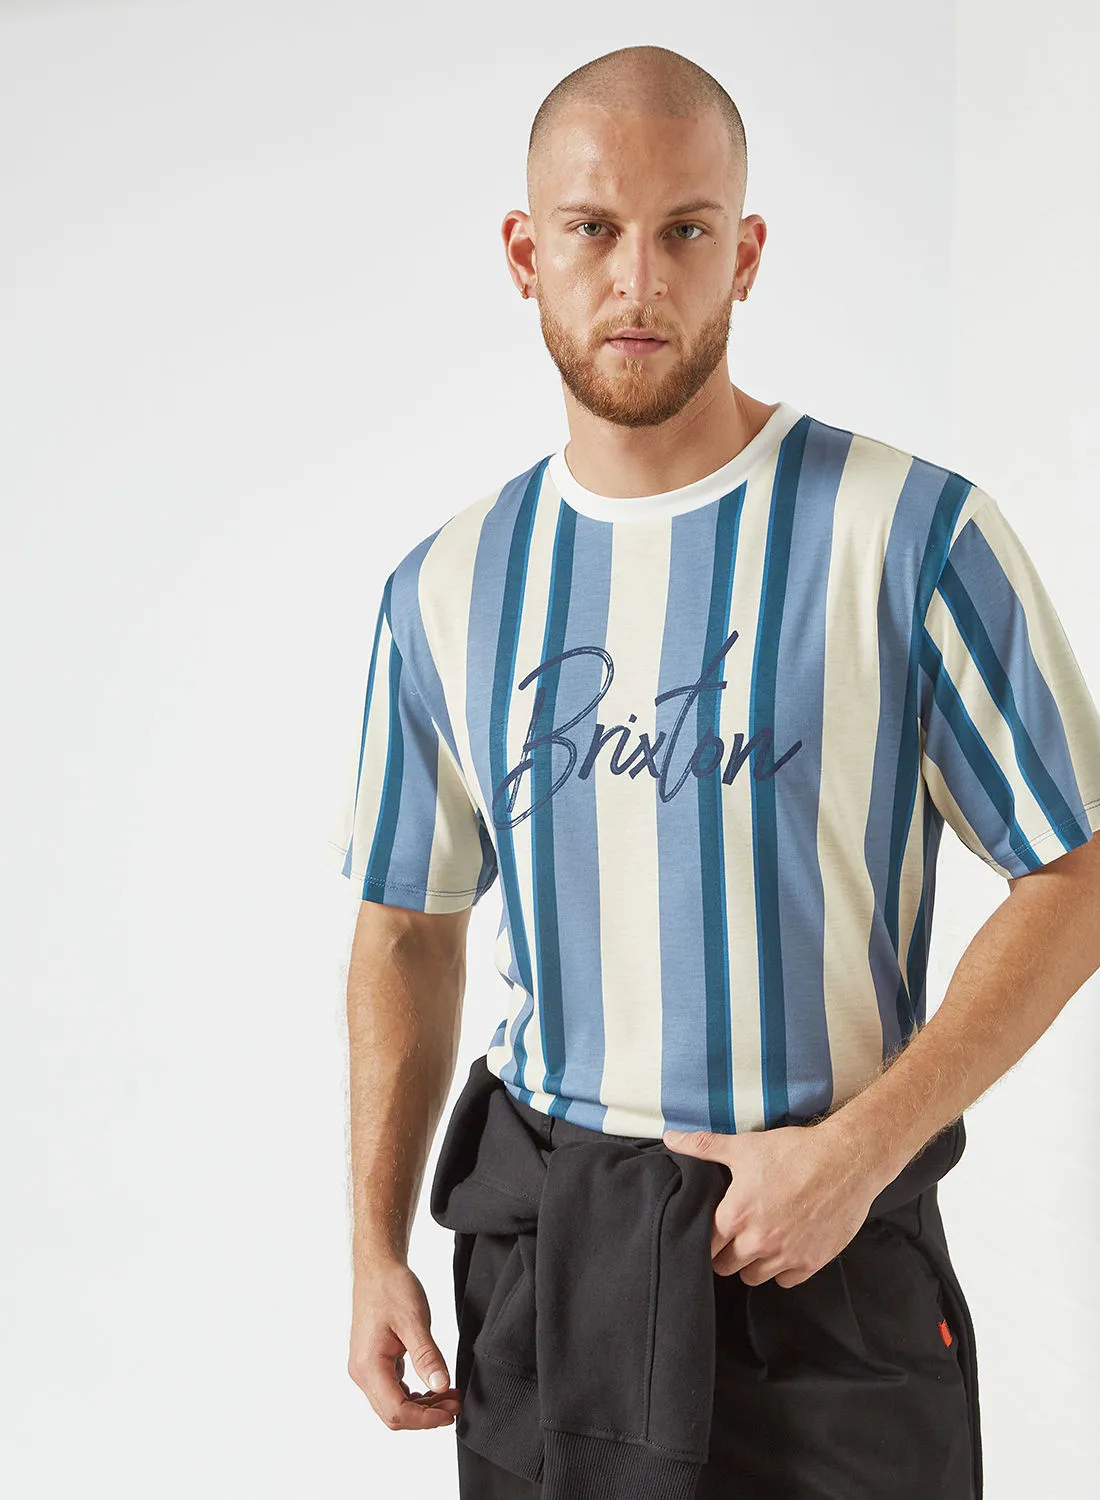 STATE 8 Text Print Striped T-Shirt Off-White